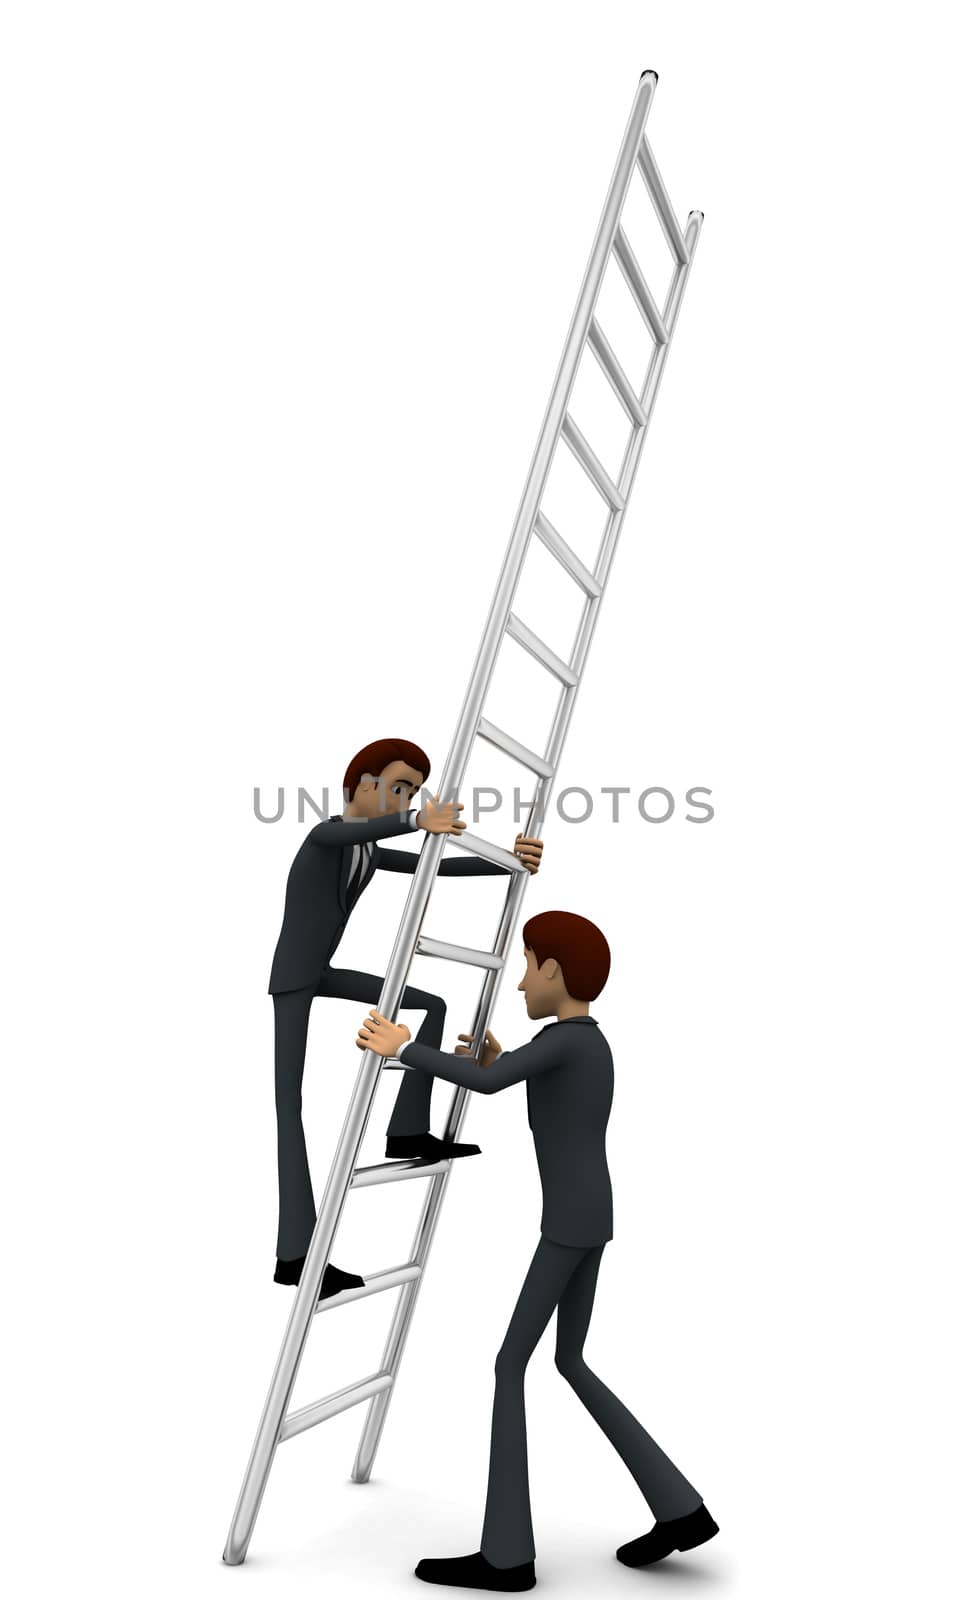 3d man climbing ladder supported by another man concept by touchmenithin@gmail.com